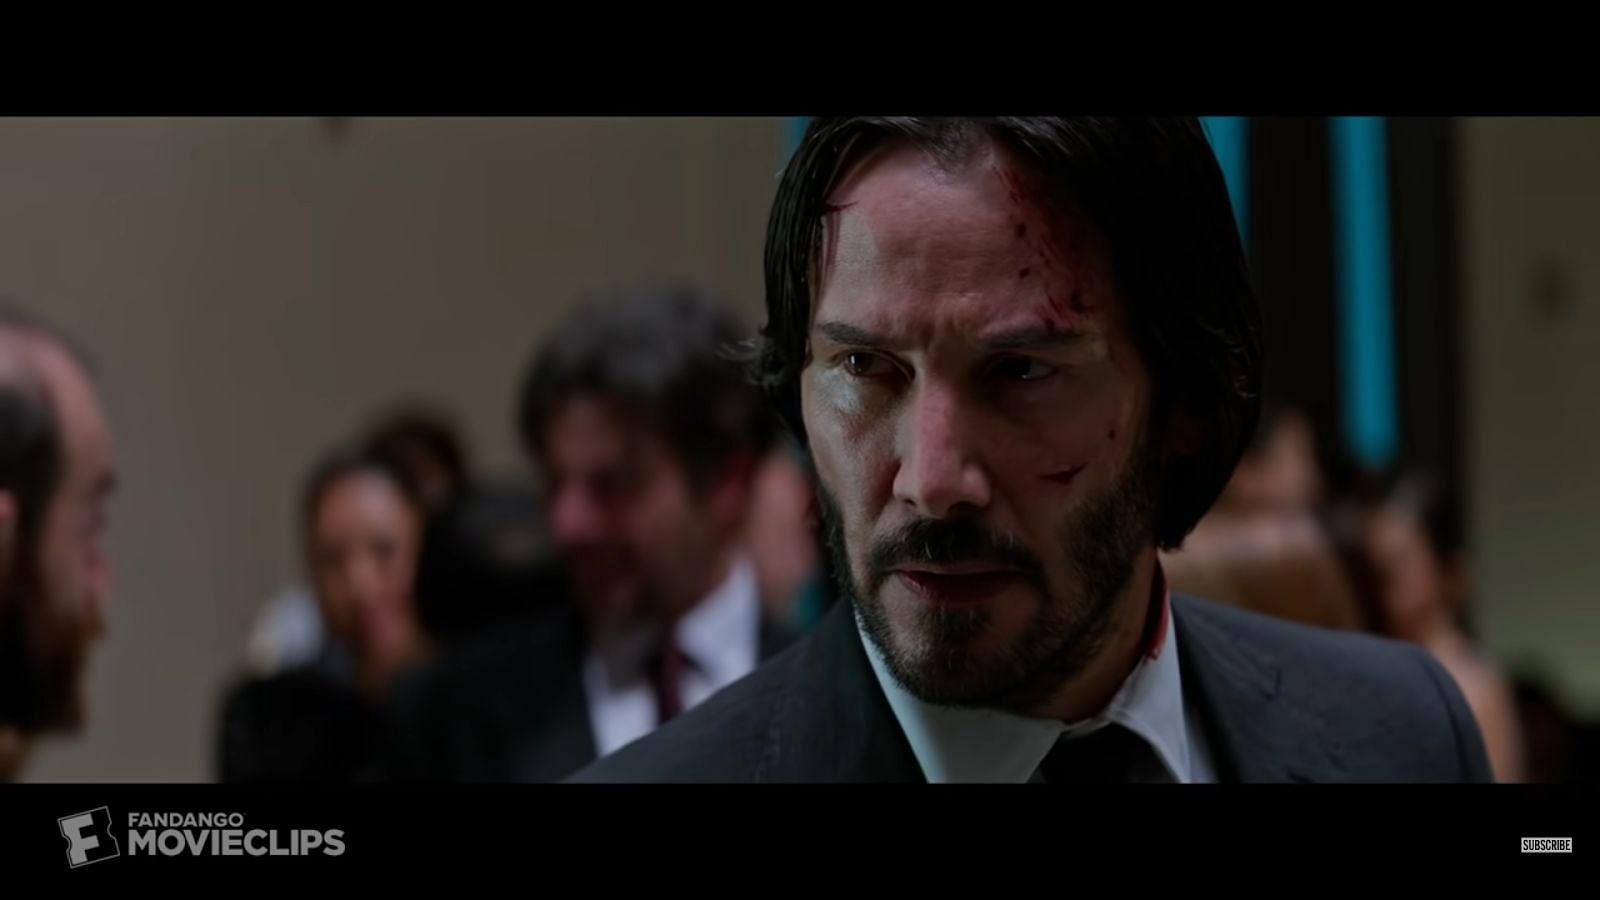 What citizenship does Keanu Reeves hold?